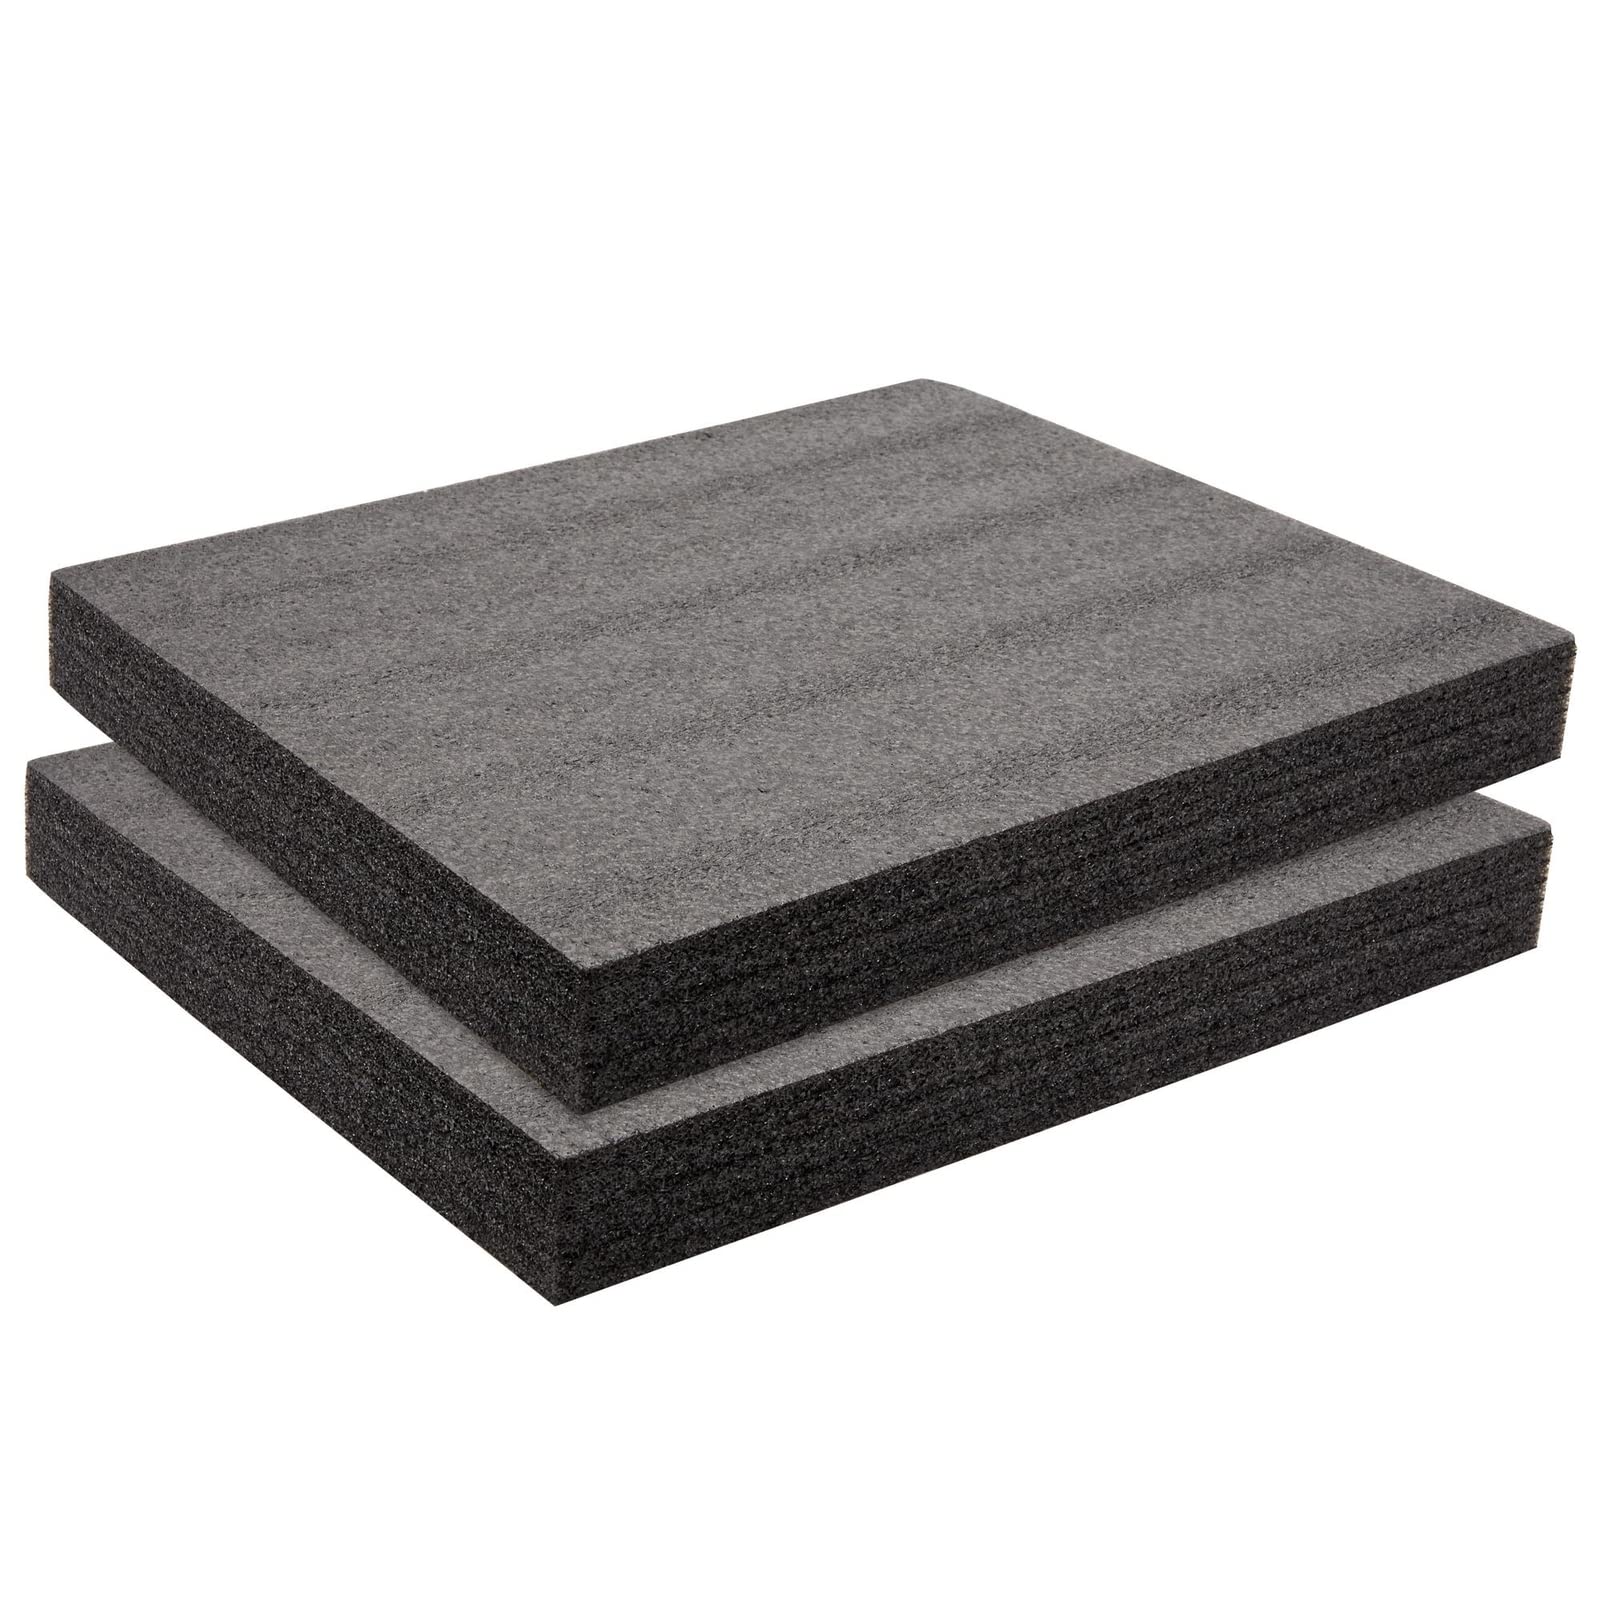 Customizable Polyethylene Foam Pads for Packing and Crafts, 1.5 In (54x16  In, 2 Sheets)